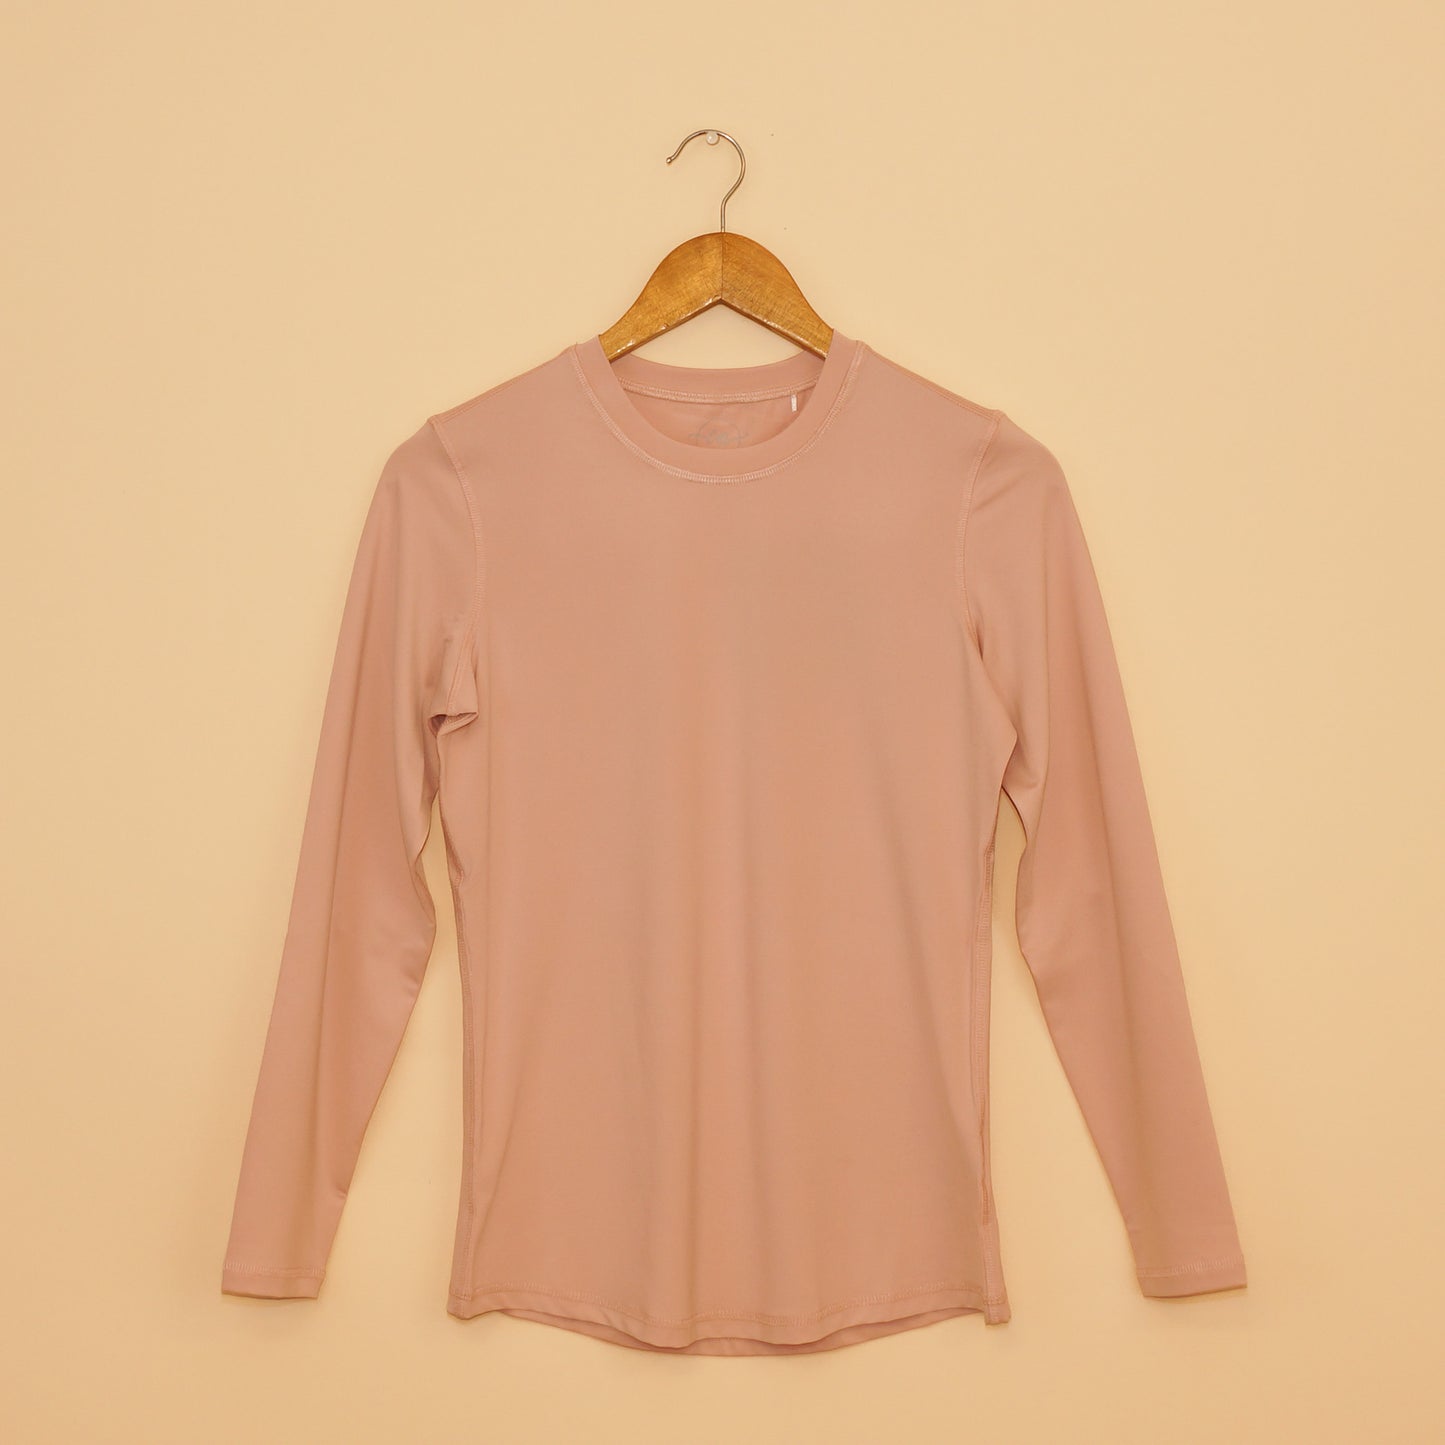 Mauve UPF 50+ Long Sleeve Performance Shirt by EA Limited Inc., featuring a comfortable and stylish design for sun protection and outdoor activities.